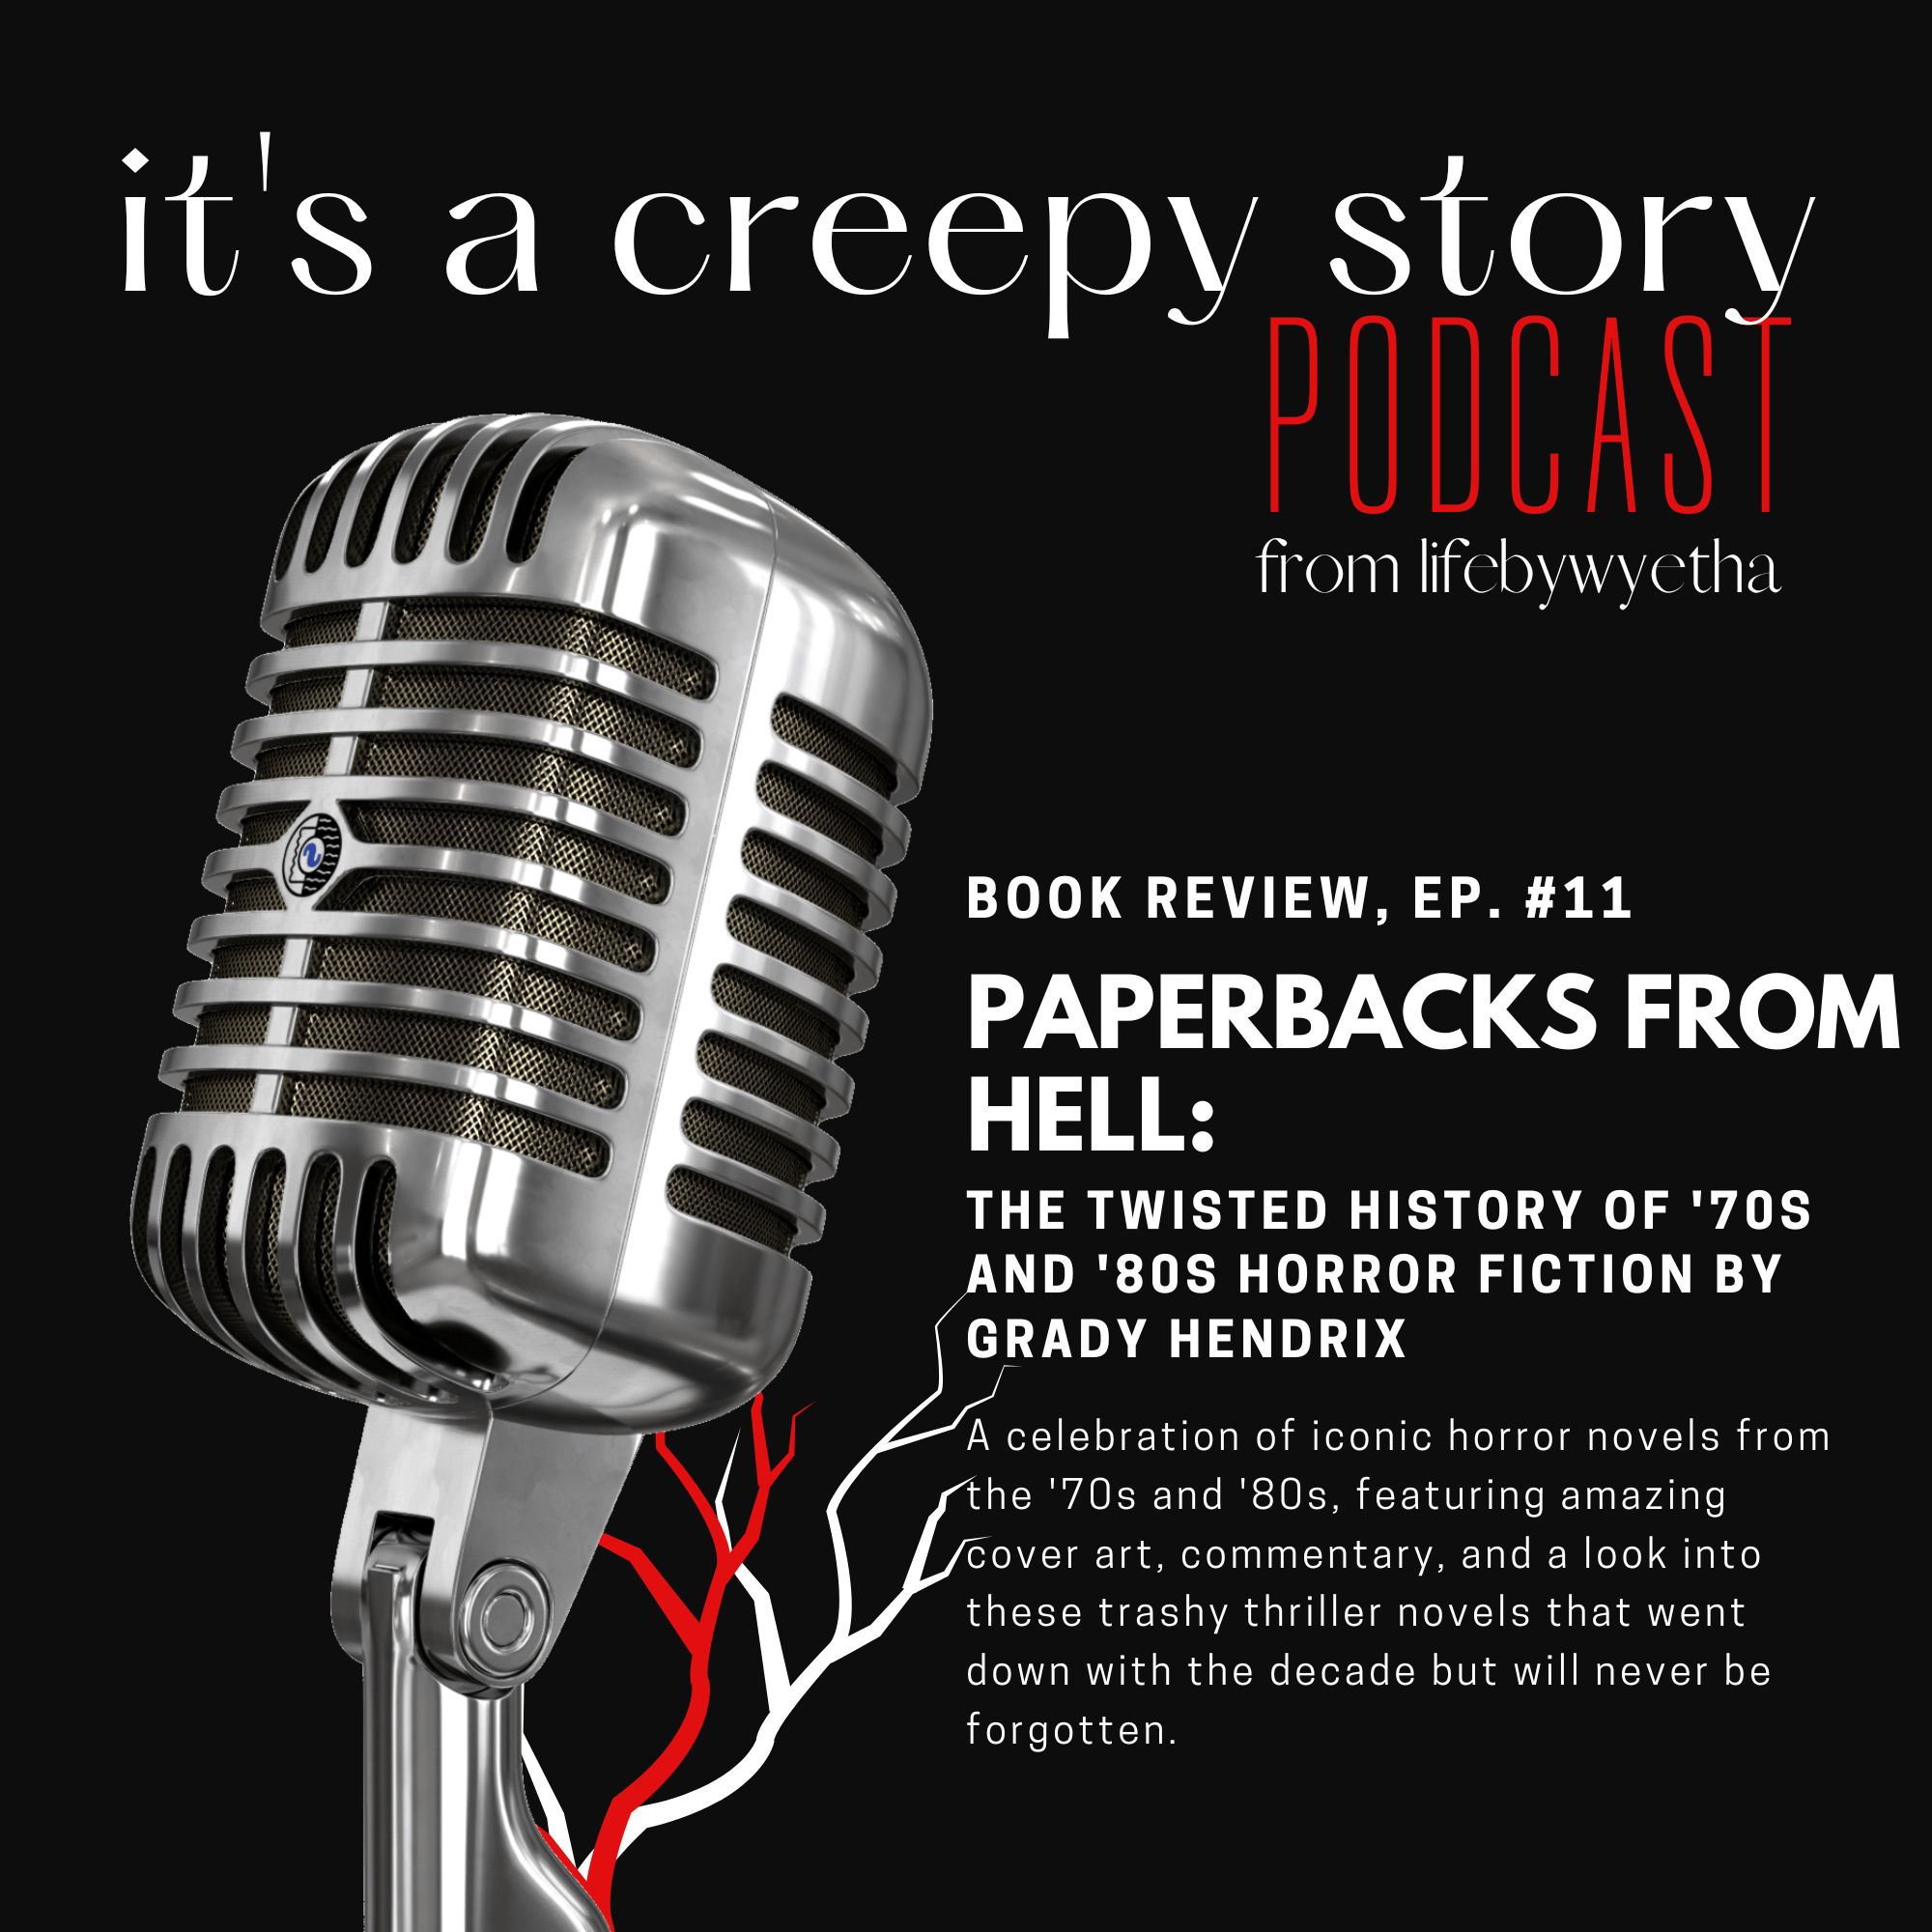 Podcast Sn. 2, It’s a Creepy Story: Episode #11